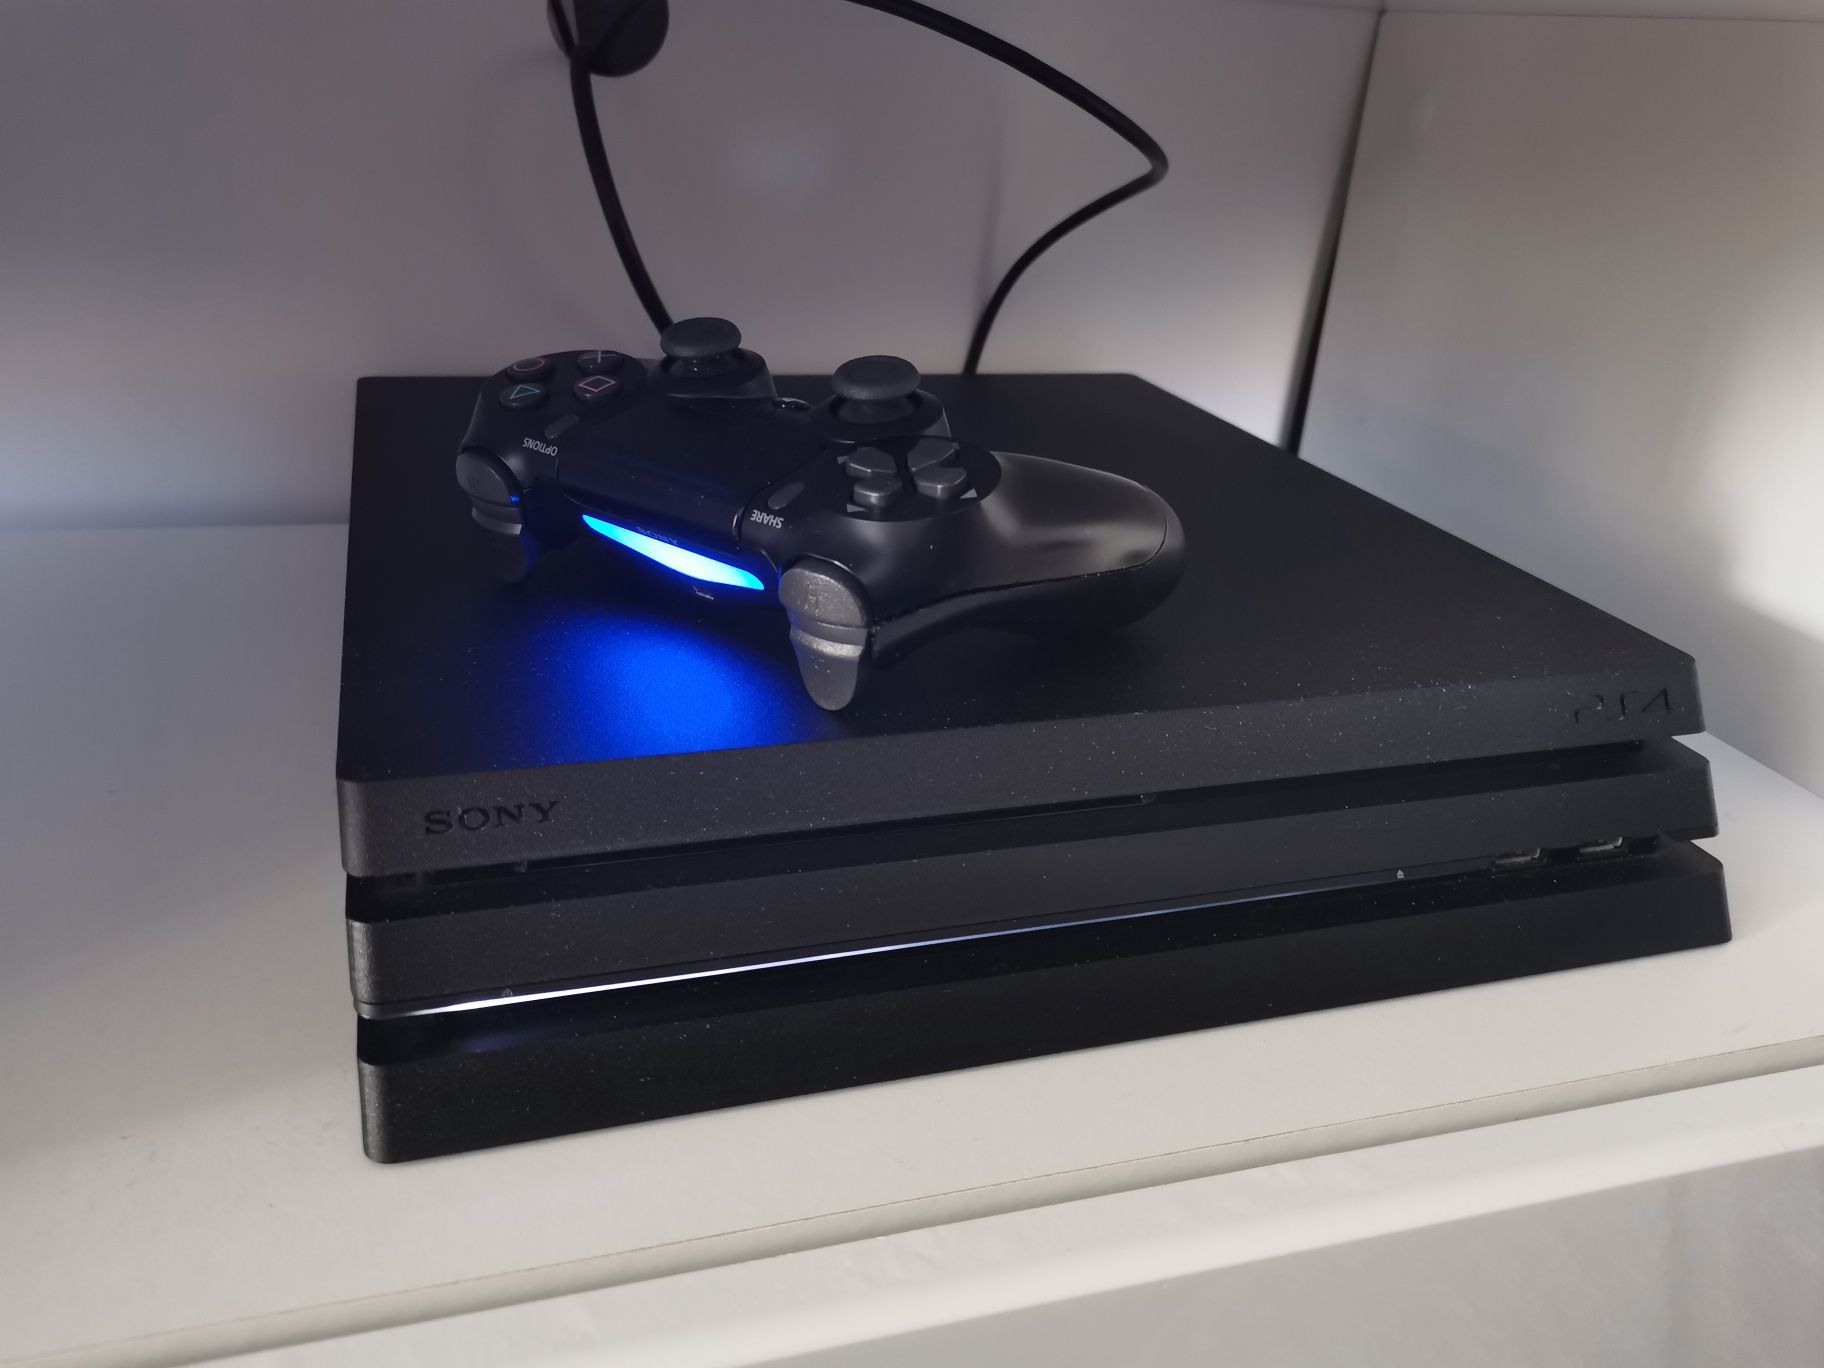 Consola PlayStation Sony PS4 Pro 1TB + controller